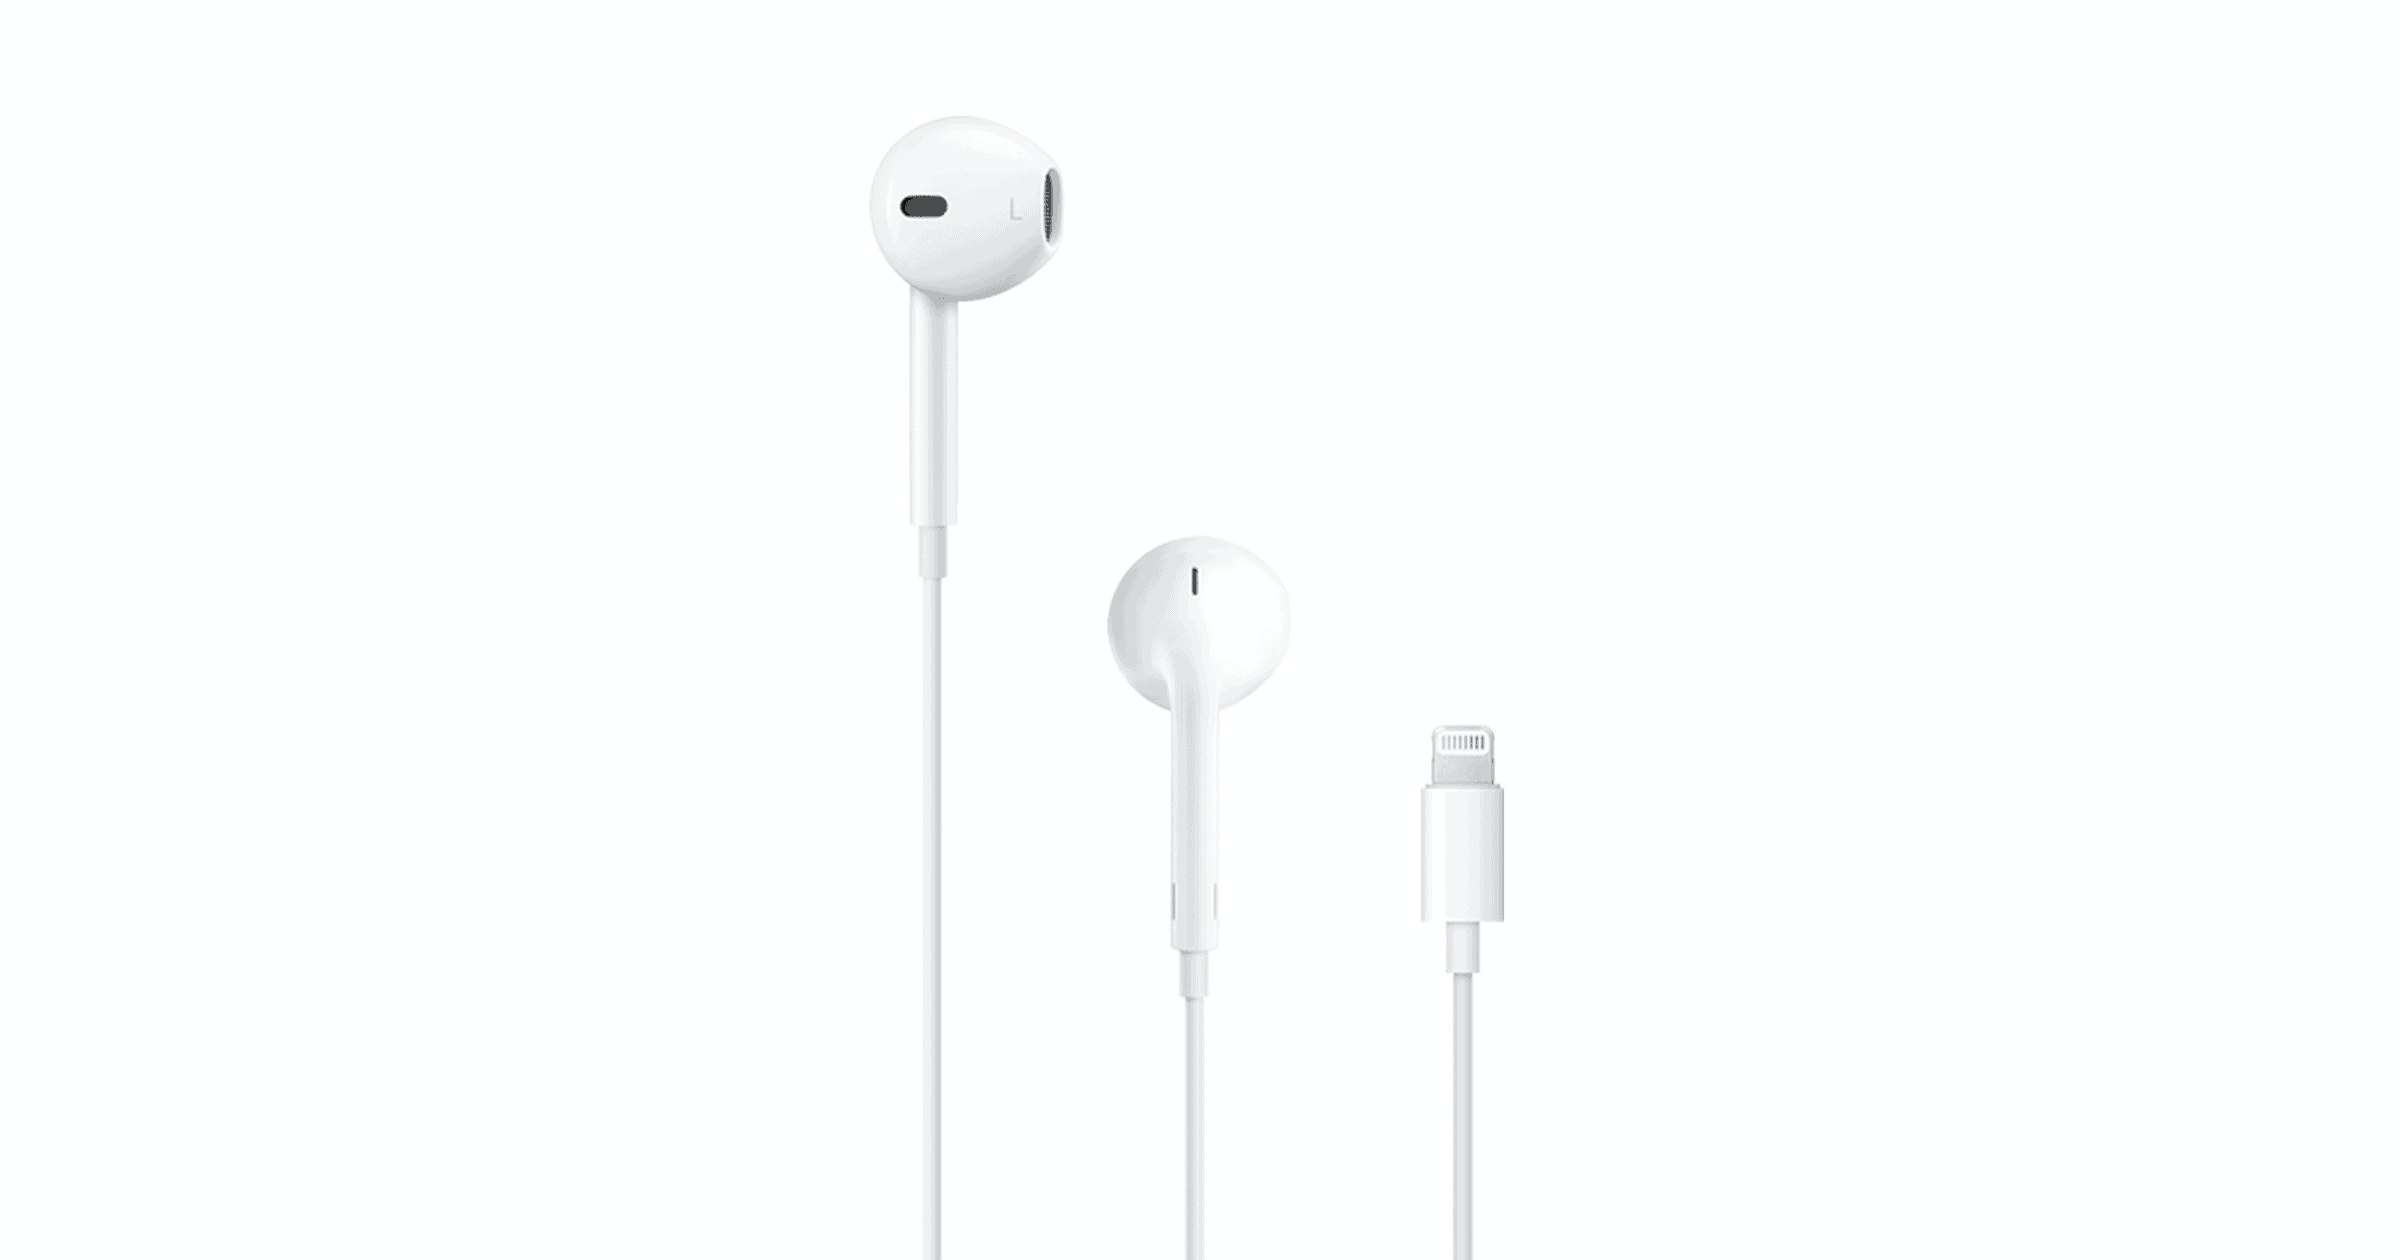 iOS 14.2 Code Offers More Confirmation That There Will Be no EarPods in iPhone 12 Box